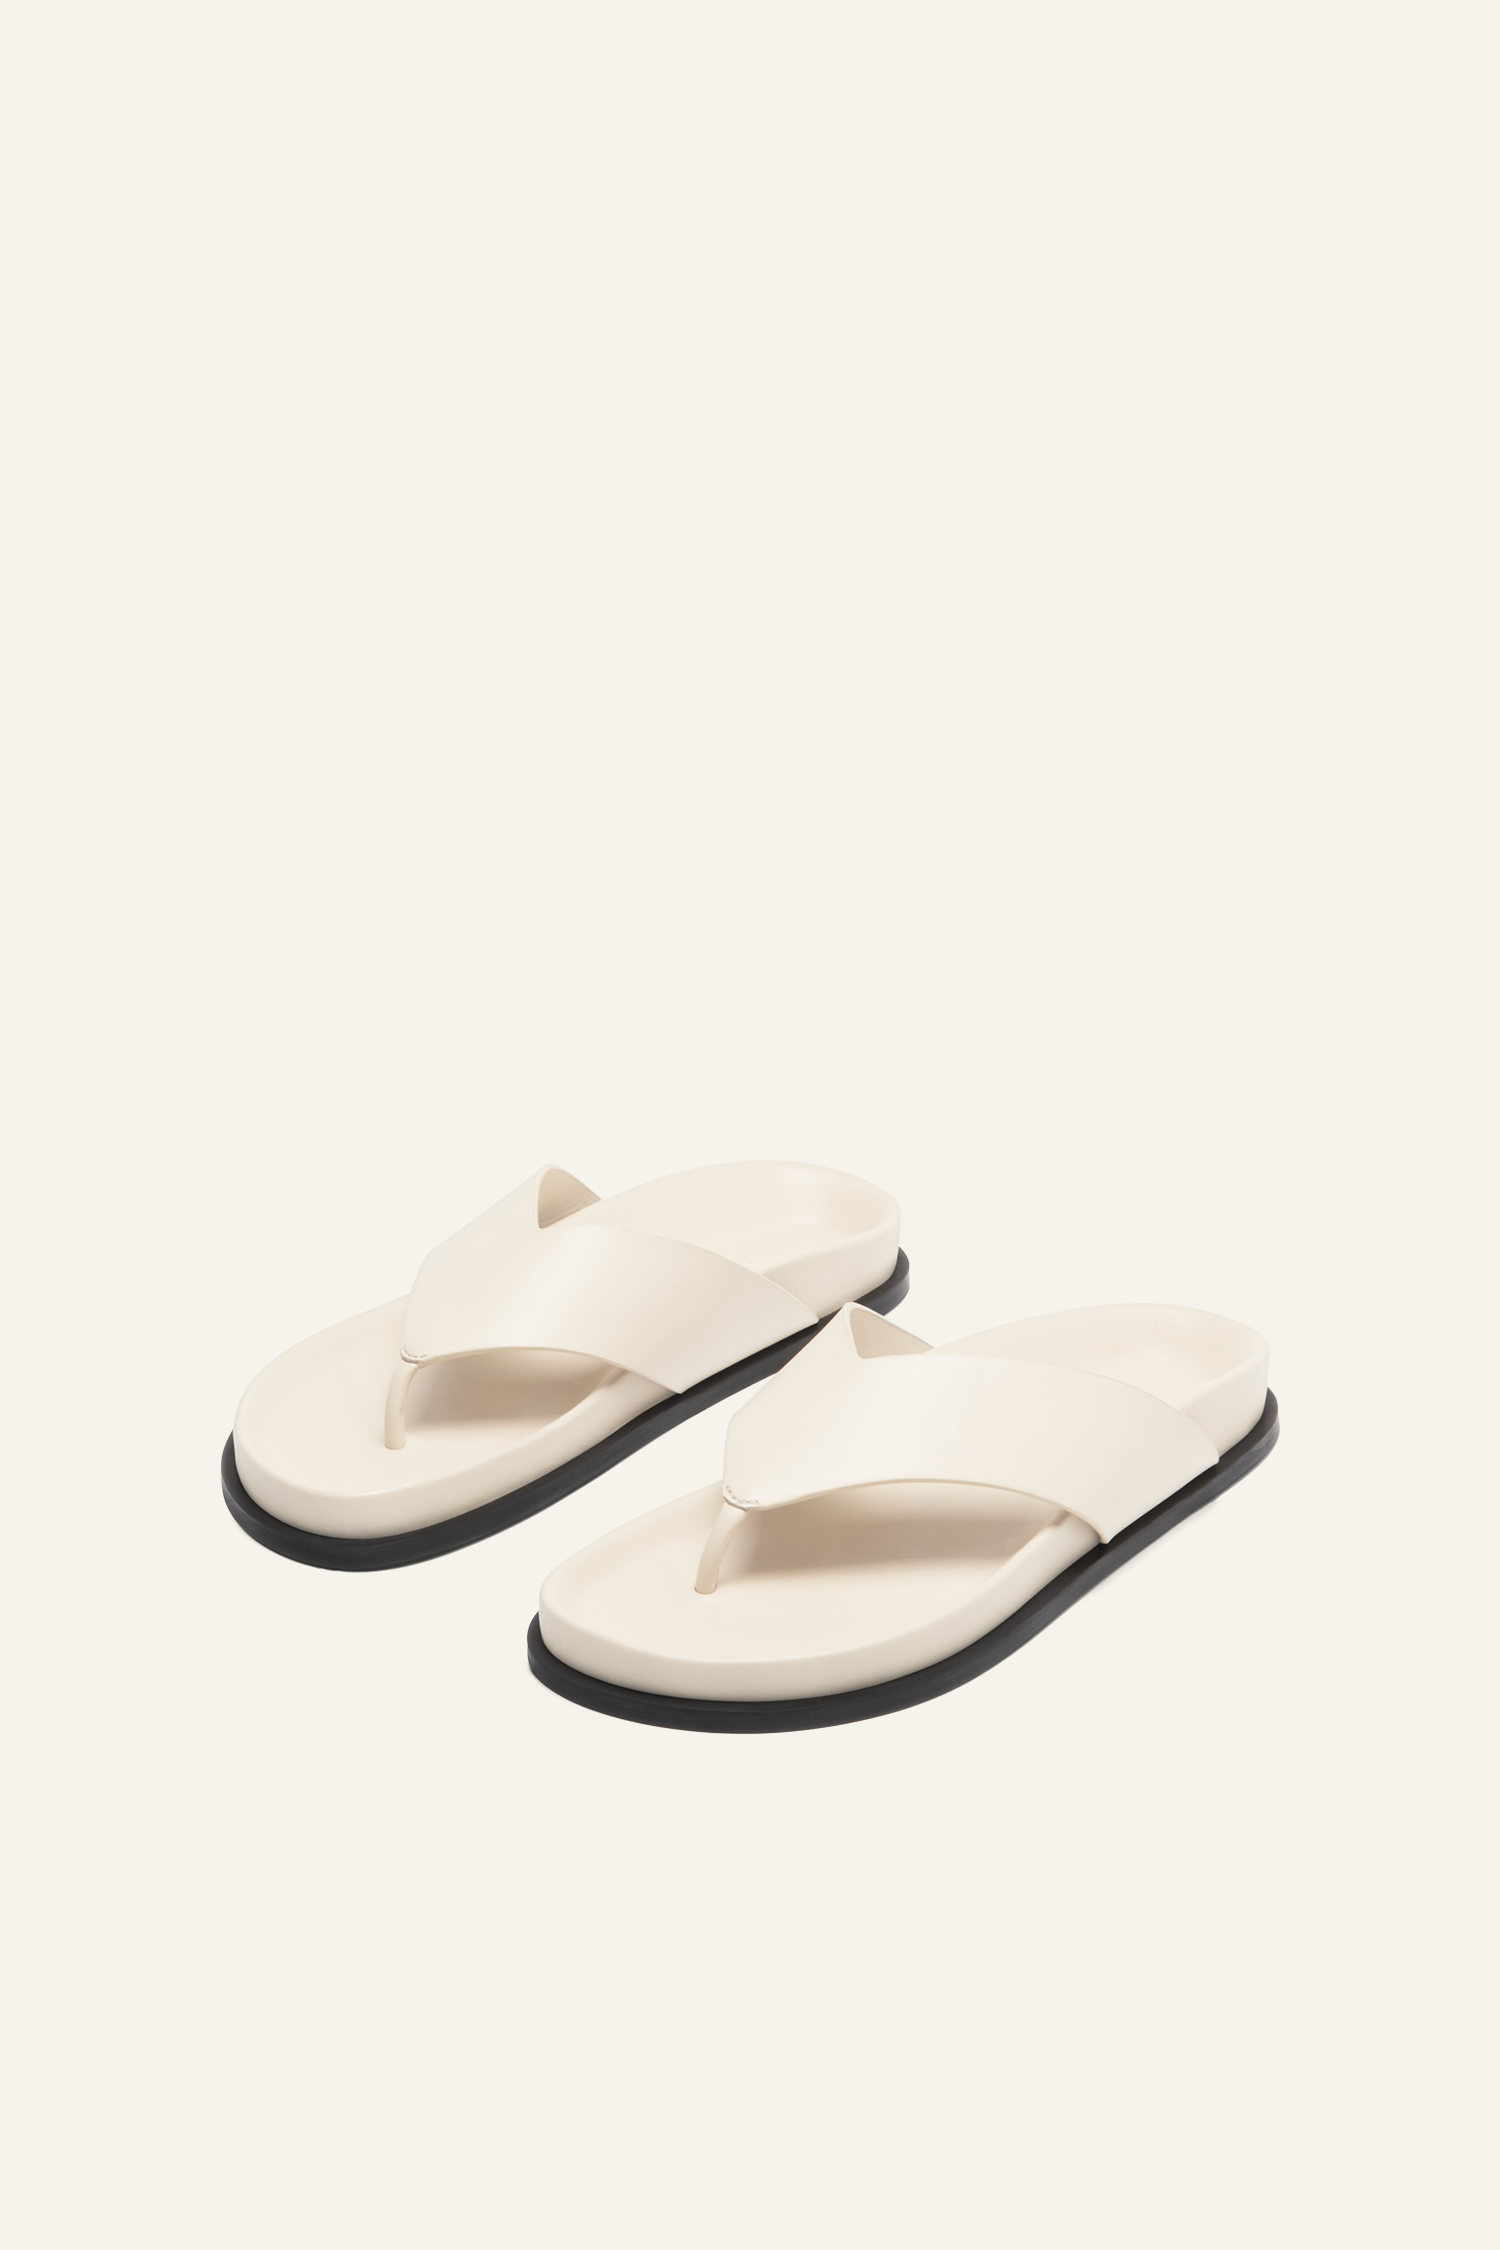 A.Emery Alma Sandal in Eggshell from The New Trend